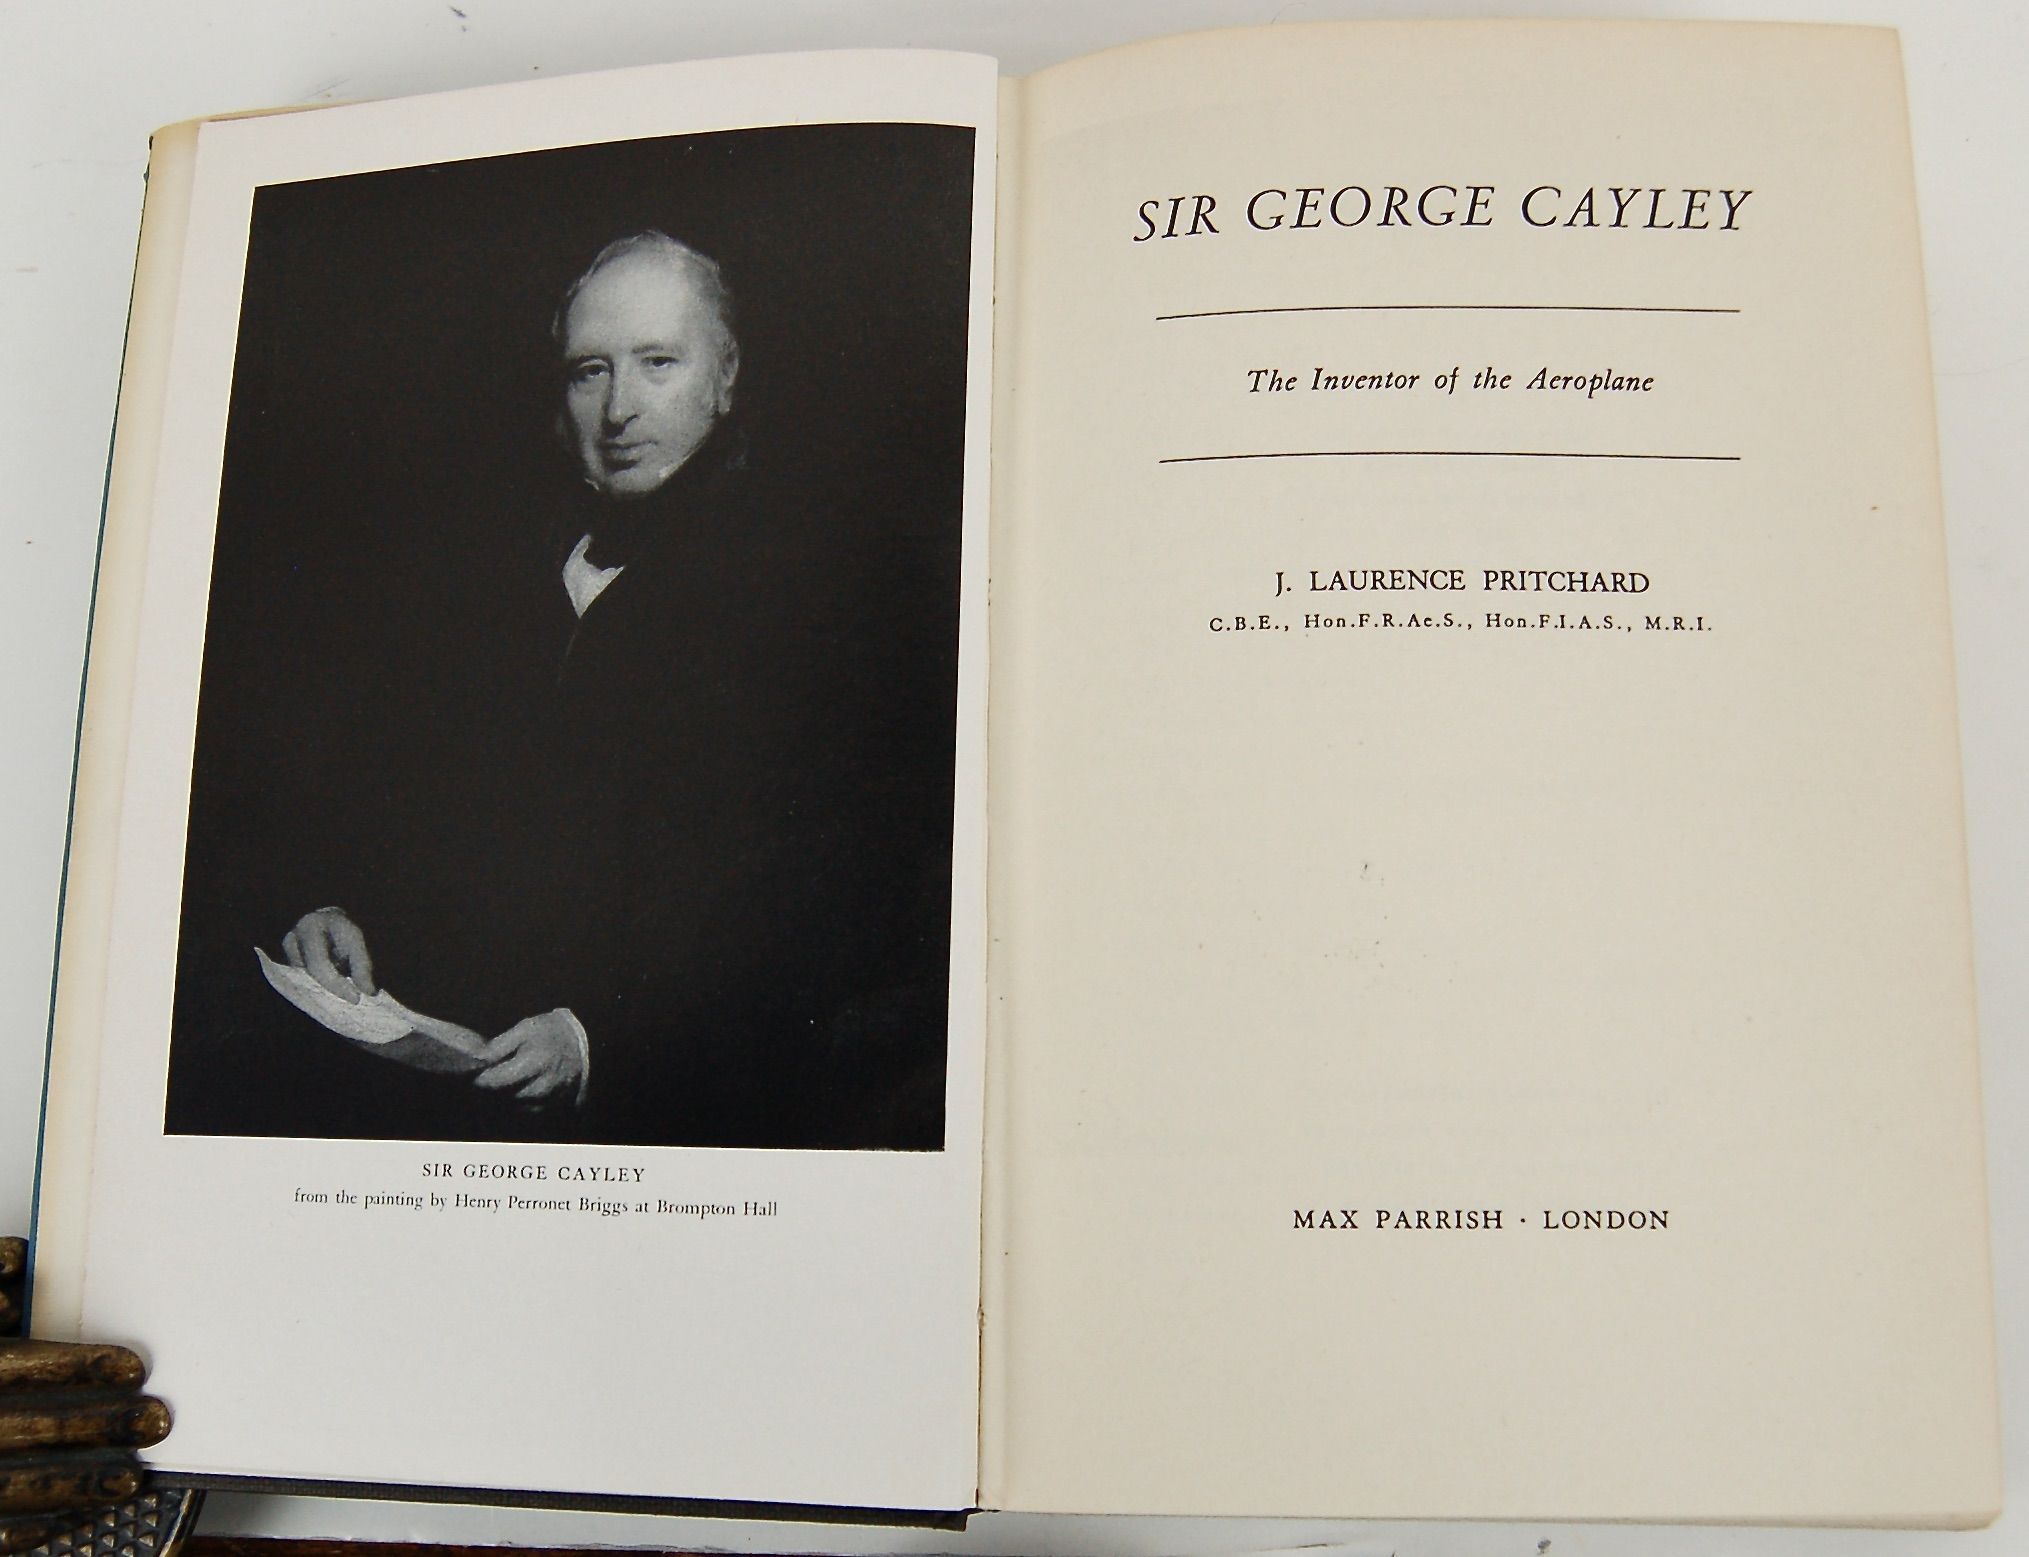  Sir George Cayley, the Inventor of the Aeroplane. 